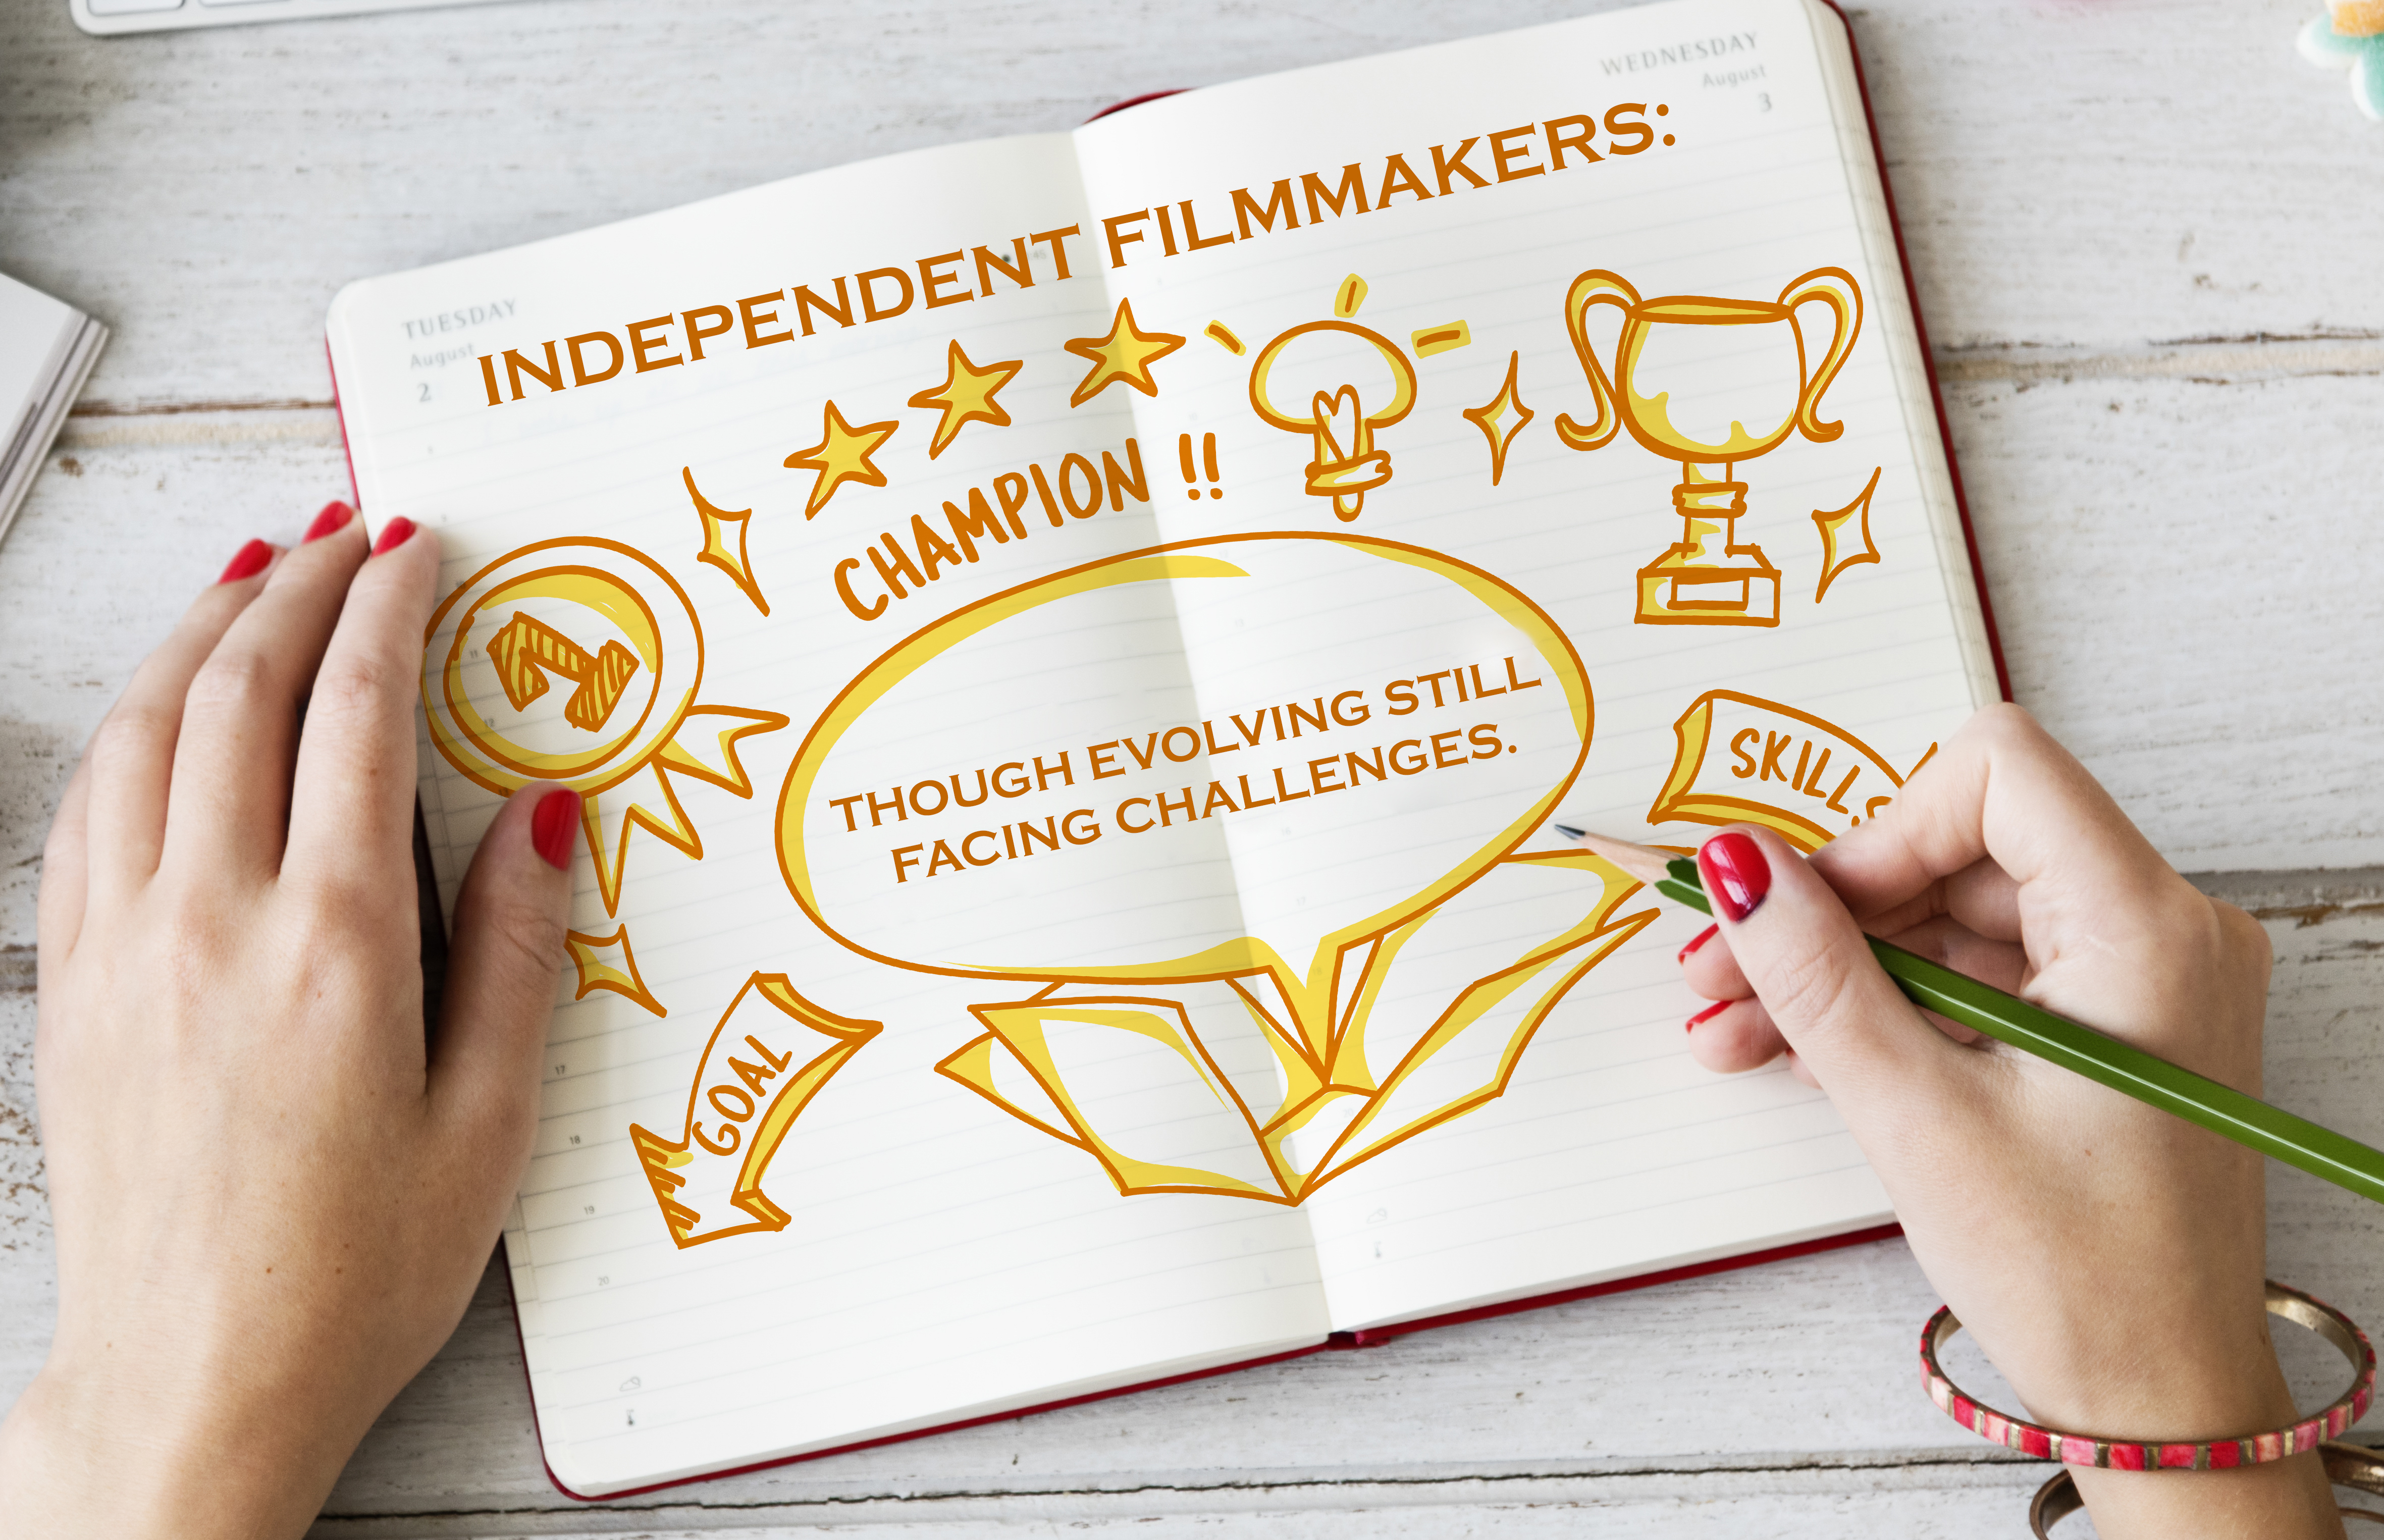 The changing scenario of Independent Film, though promising yet facing challenges